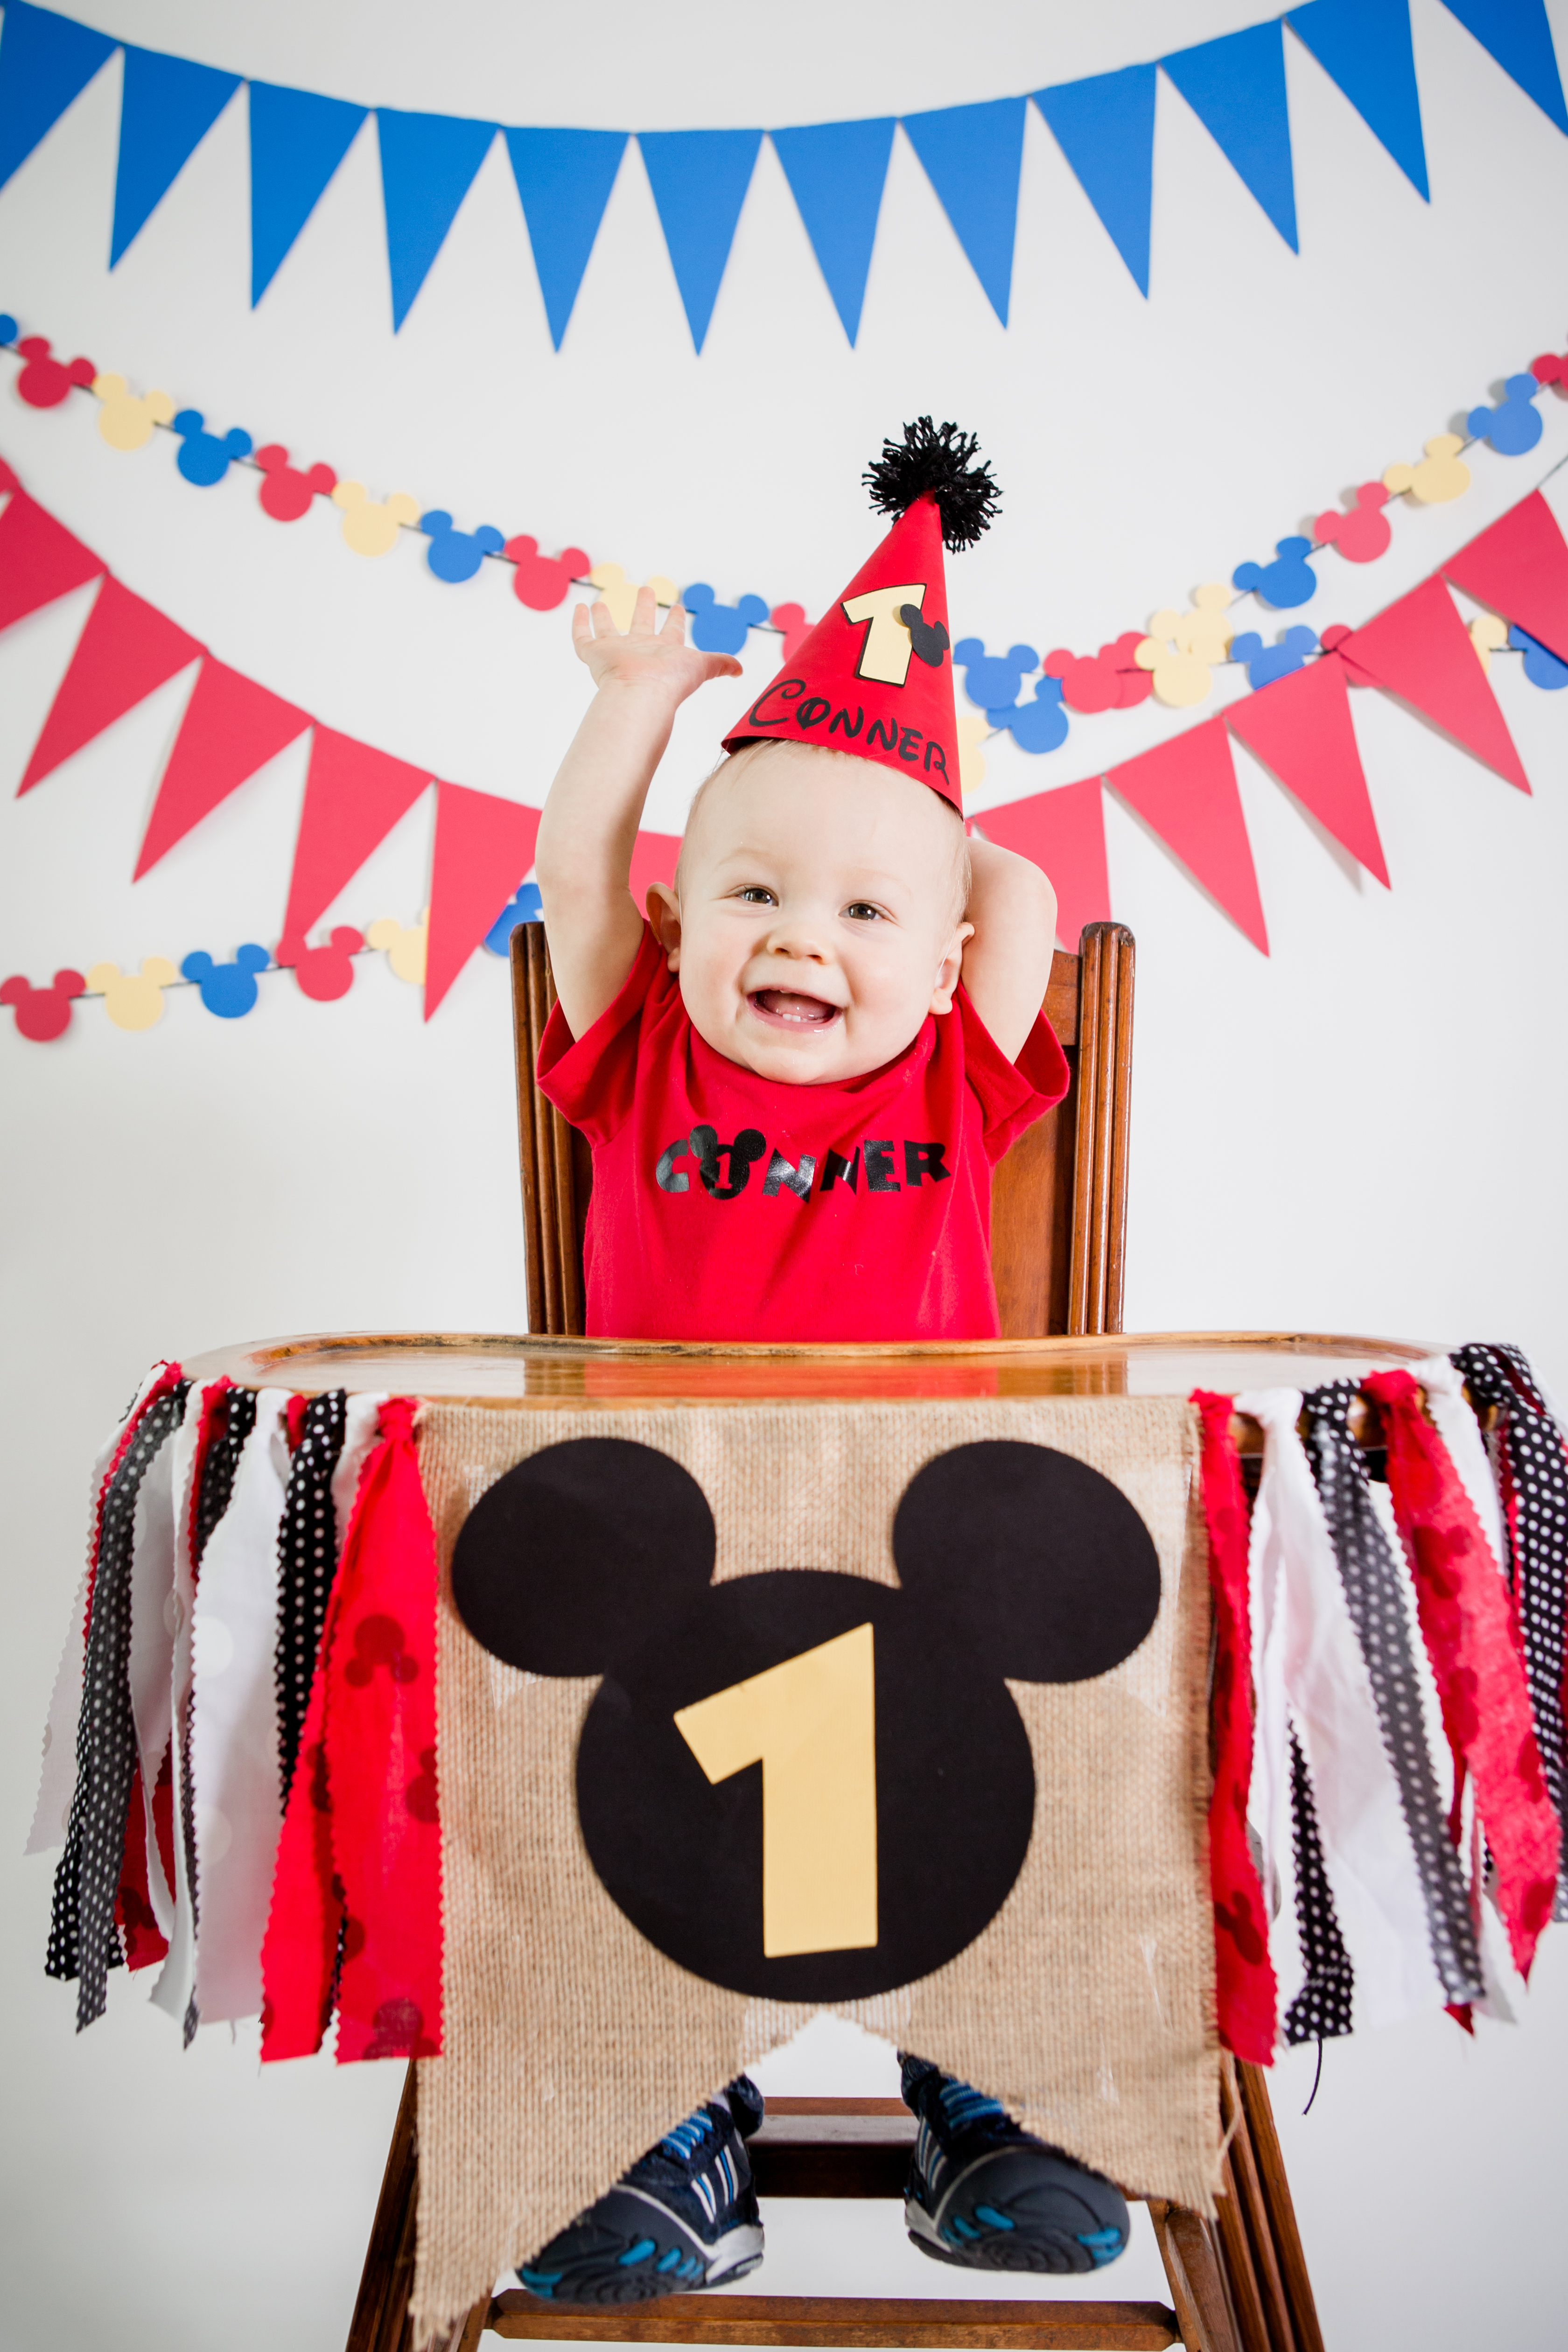 Mickey mouse by Knoxville Wedding Photographer, Amanda May Photos.